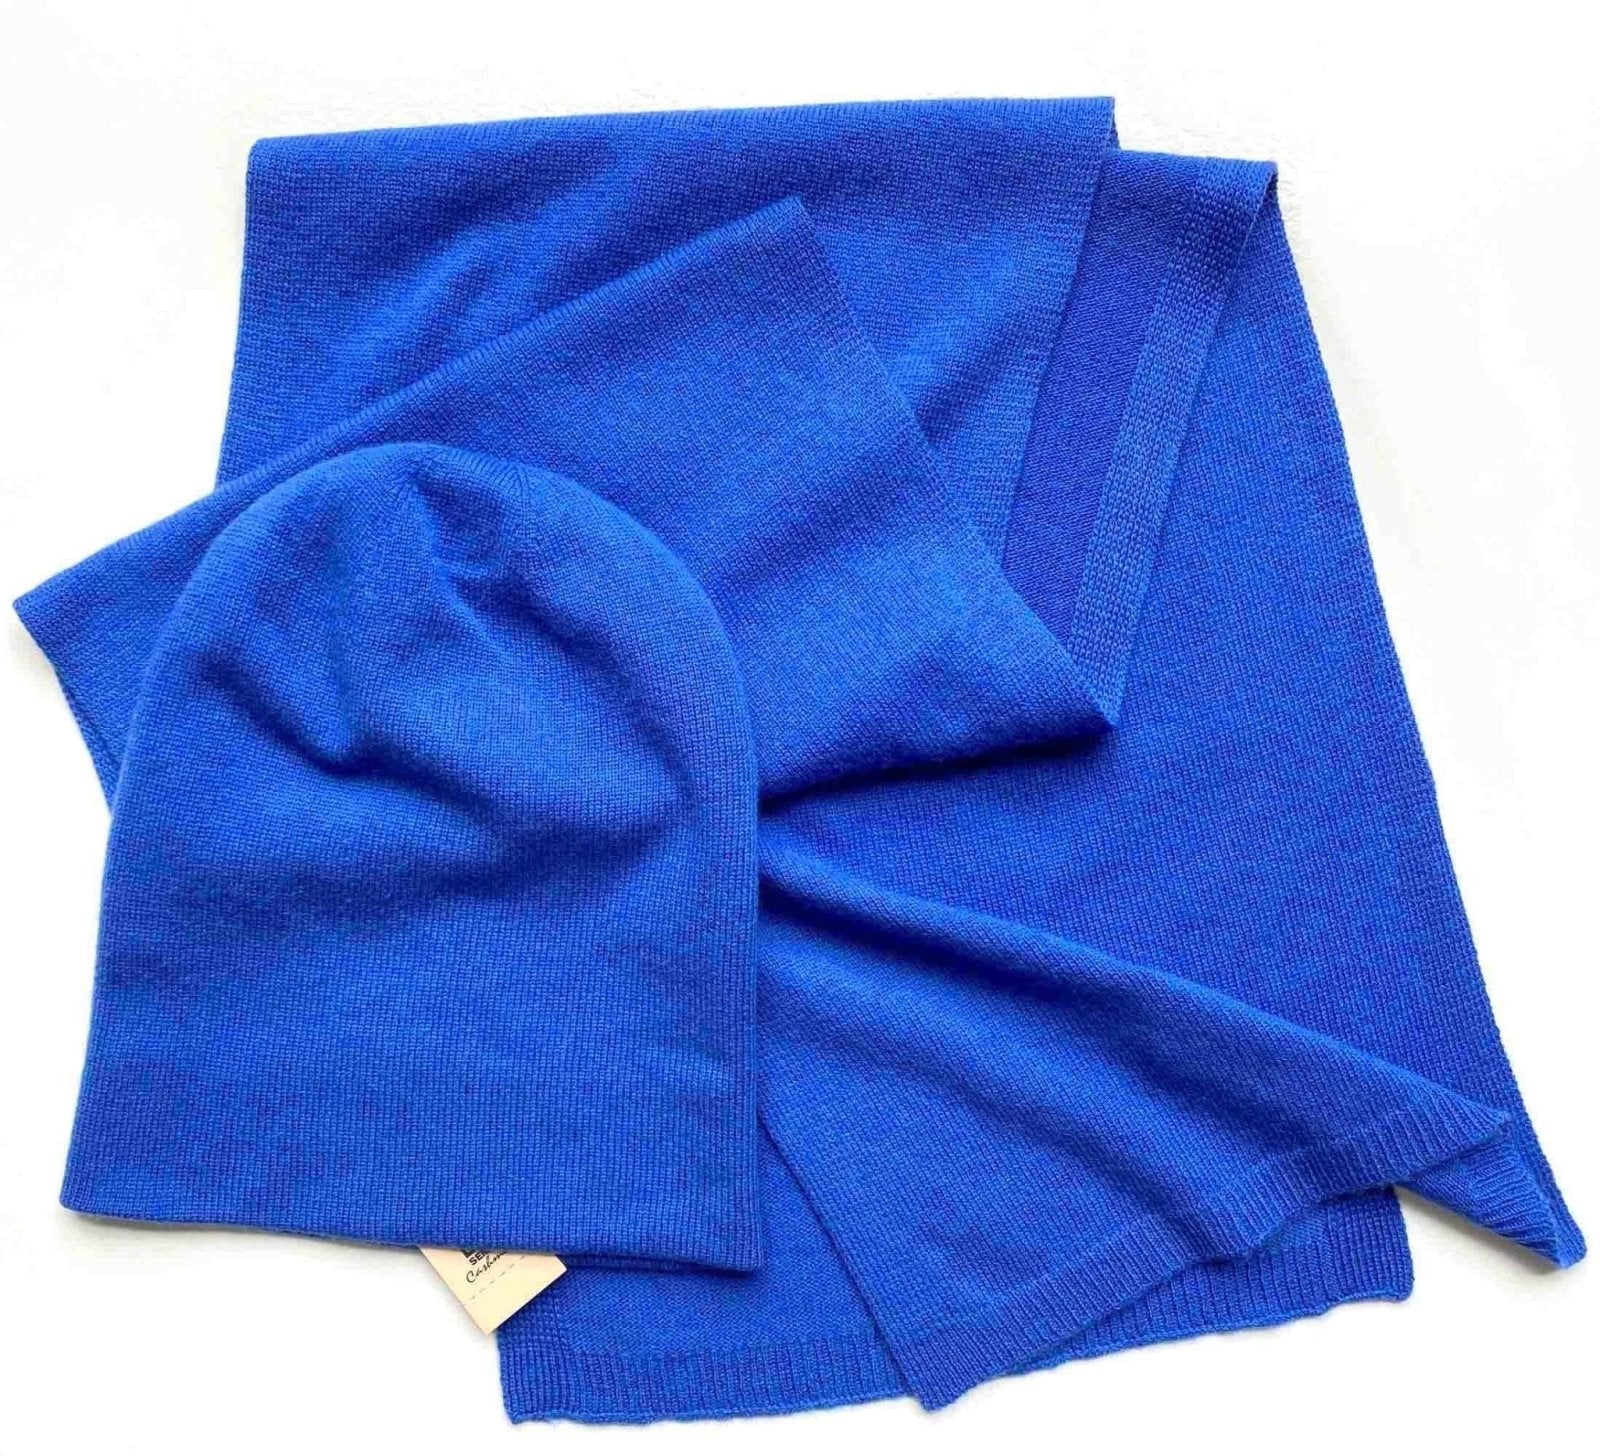 Bundle offer for cashmere hat and scarf in Royal blue - SEMON Cashmere